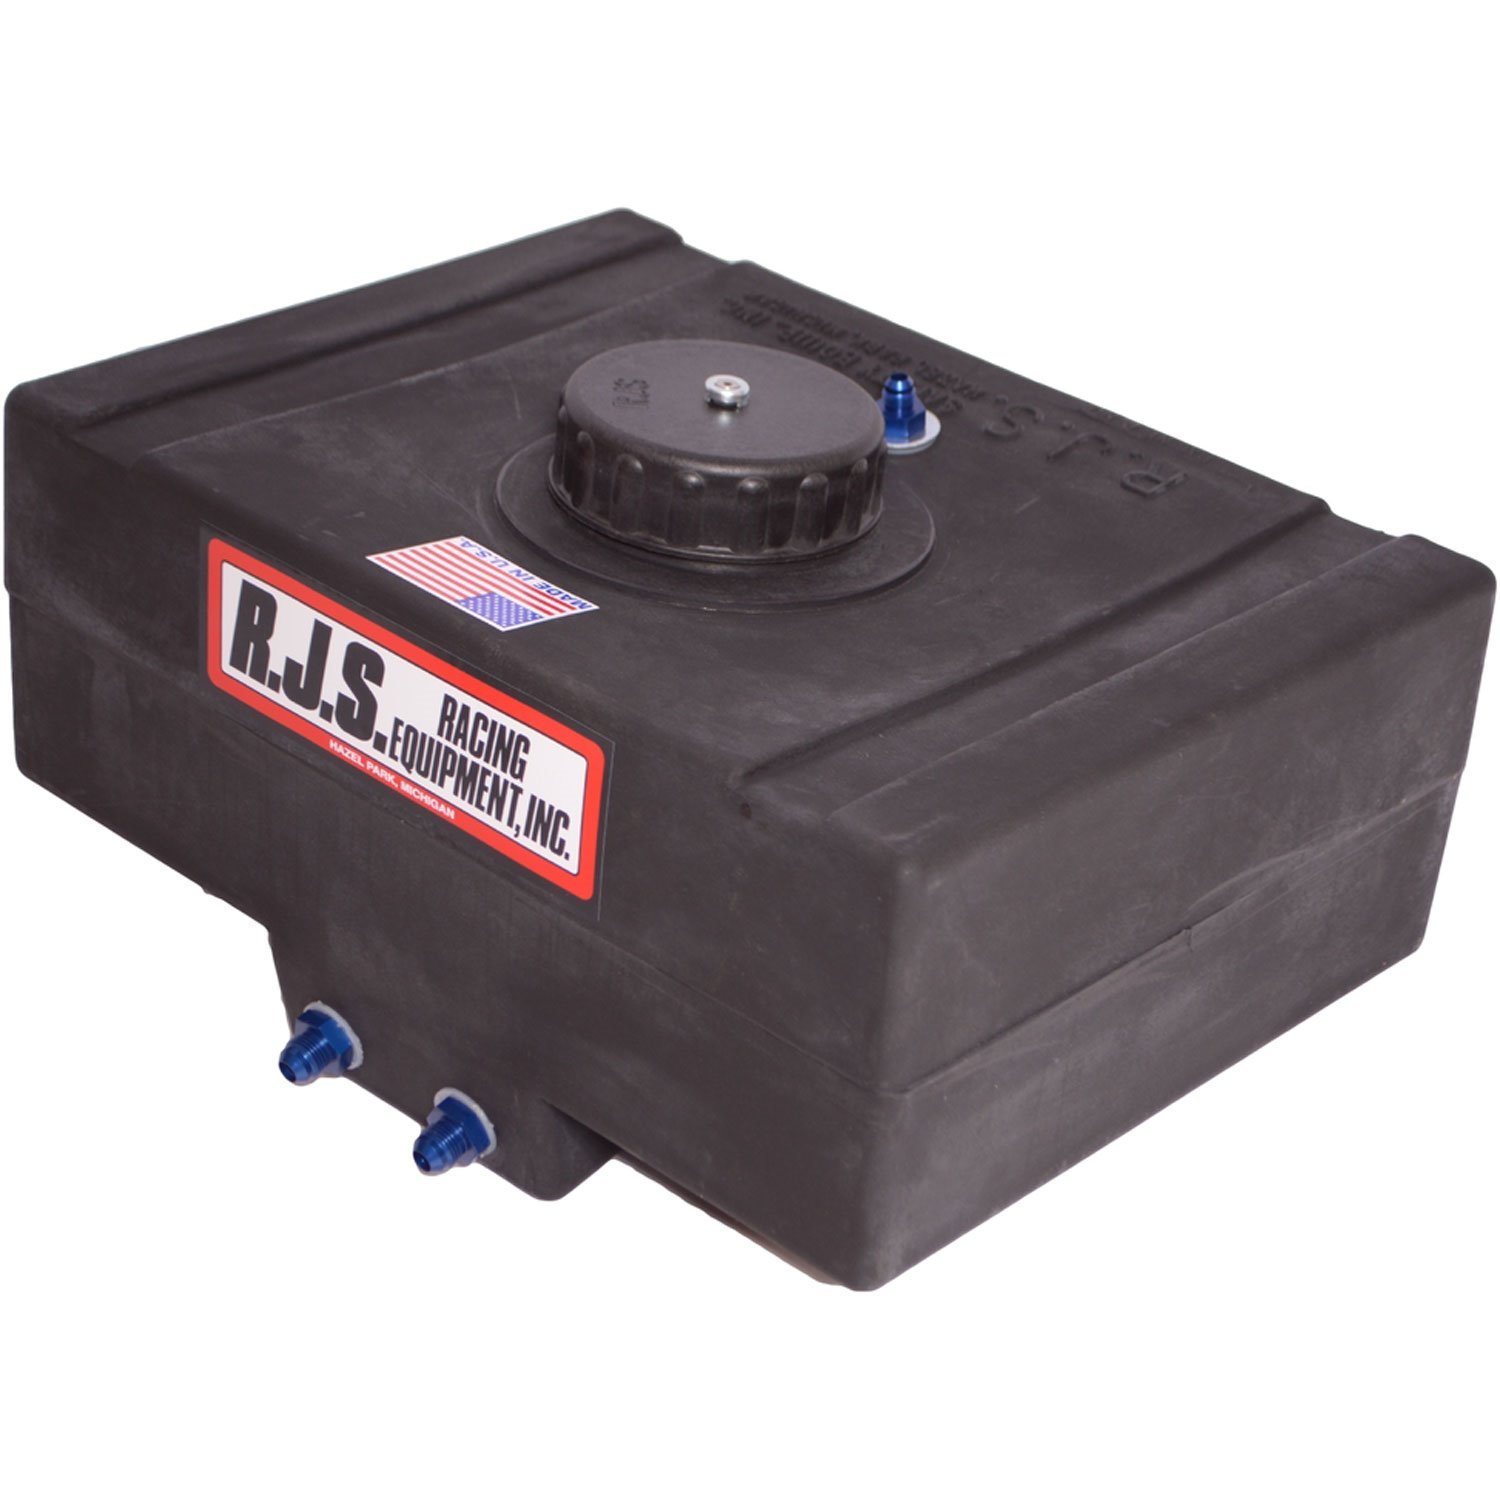 8 Gallon Drag Fuel Cell with Raised Plastic